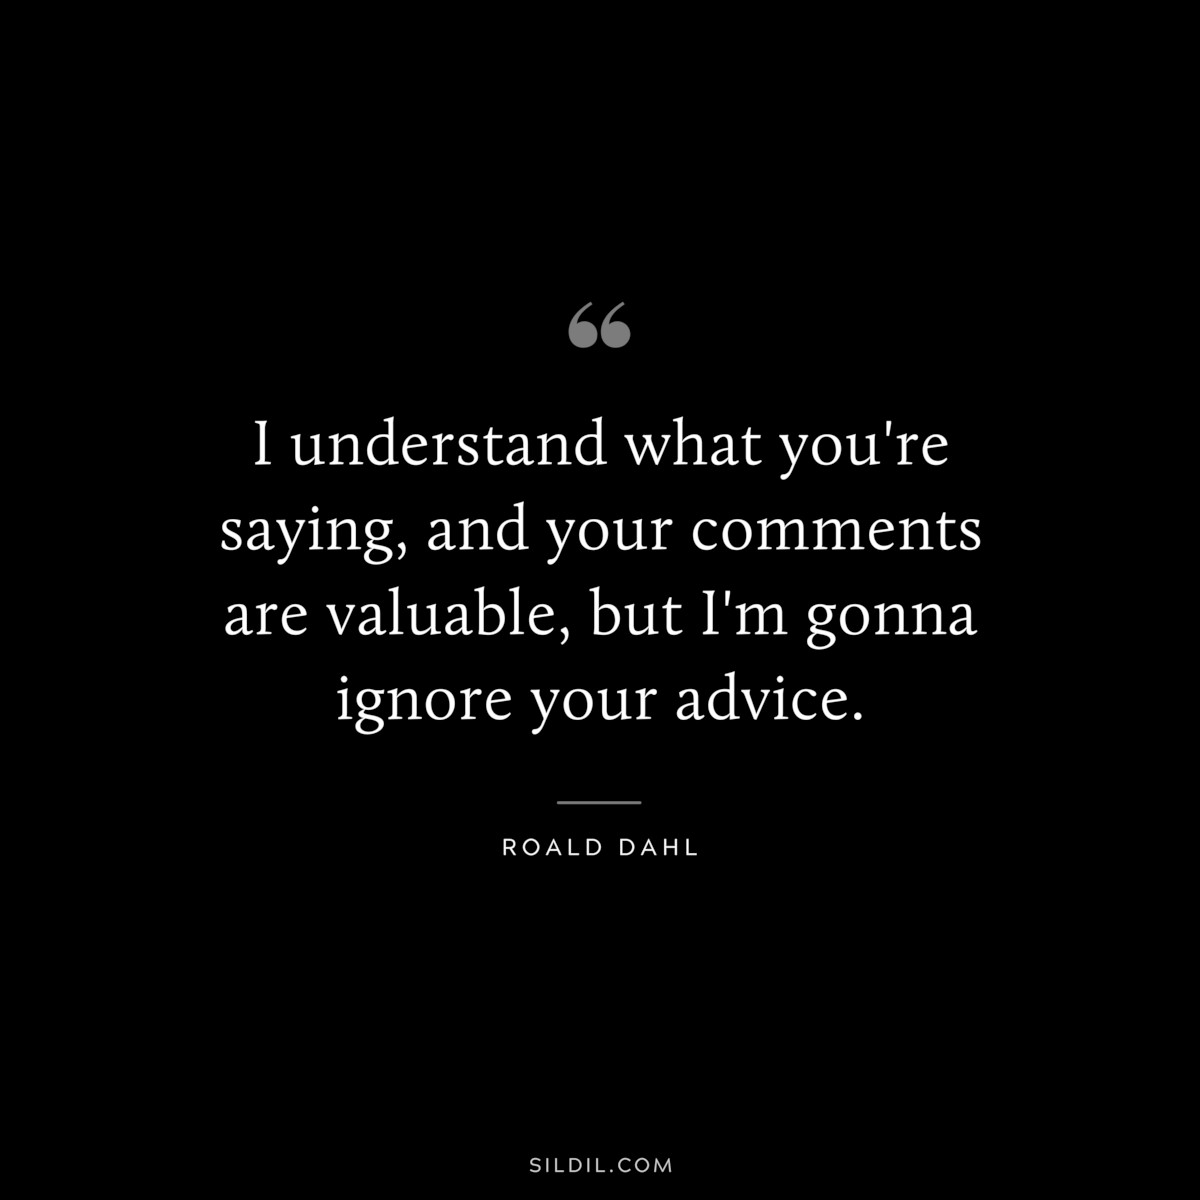 I understand what you're saying, and your comments are valuable, but I'm gonna ignore your advice. ― Roald Dahl